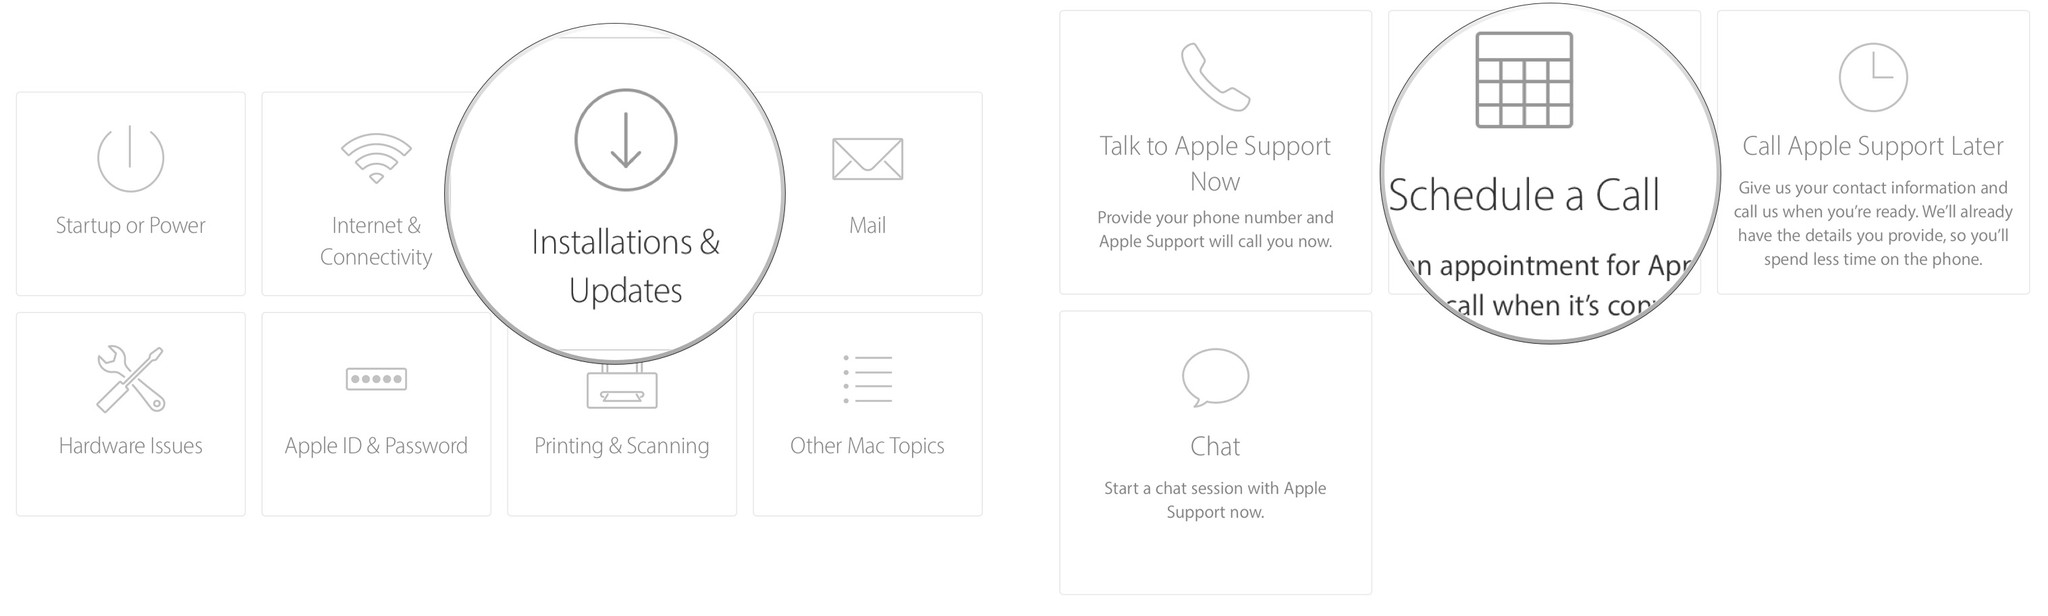 How to chat with Apple support online or on the phone: Select a topic. Select Chat, Talk to Apple Support Now, Schedule a Call, or Call Apple Support Later to contact Apple support.  Apple will contact you through the channel that you specified (unless you selected Call Apple Support Later, in which case, you would need to contact Apple).